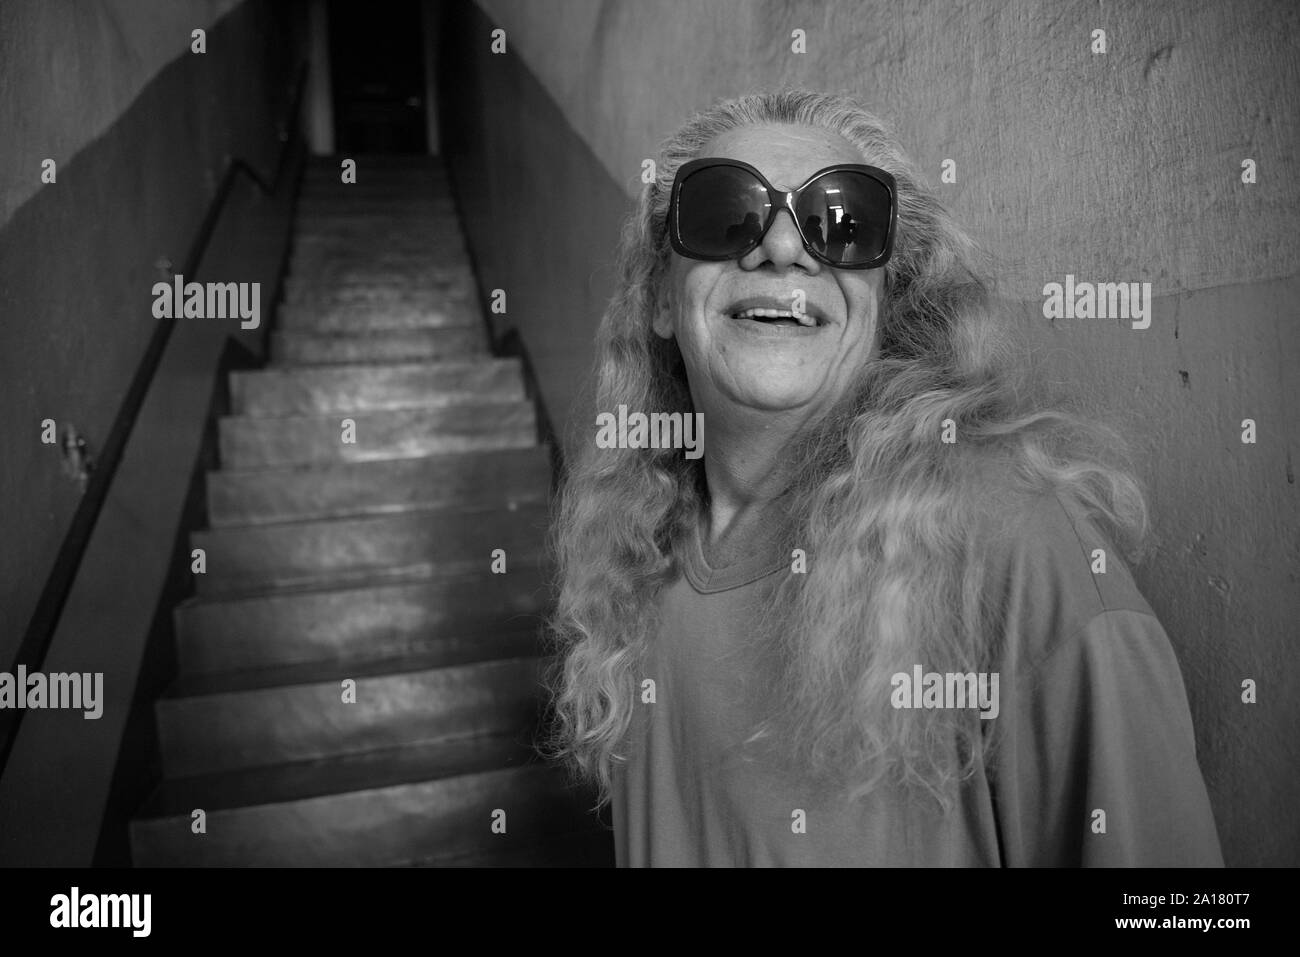 Smiling transgender with large sunglasses on a staircase Stock Photo